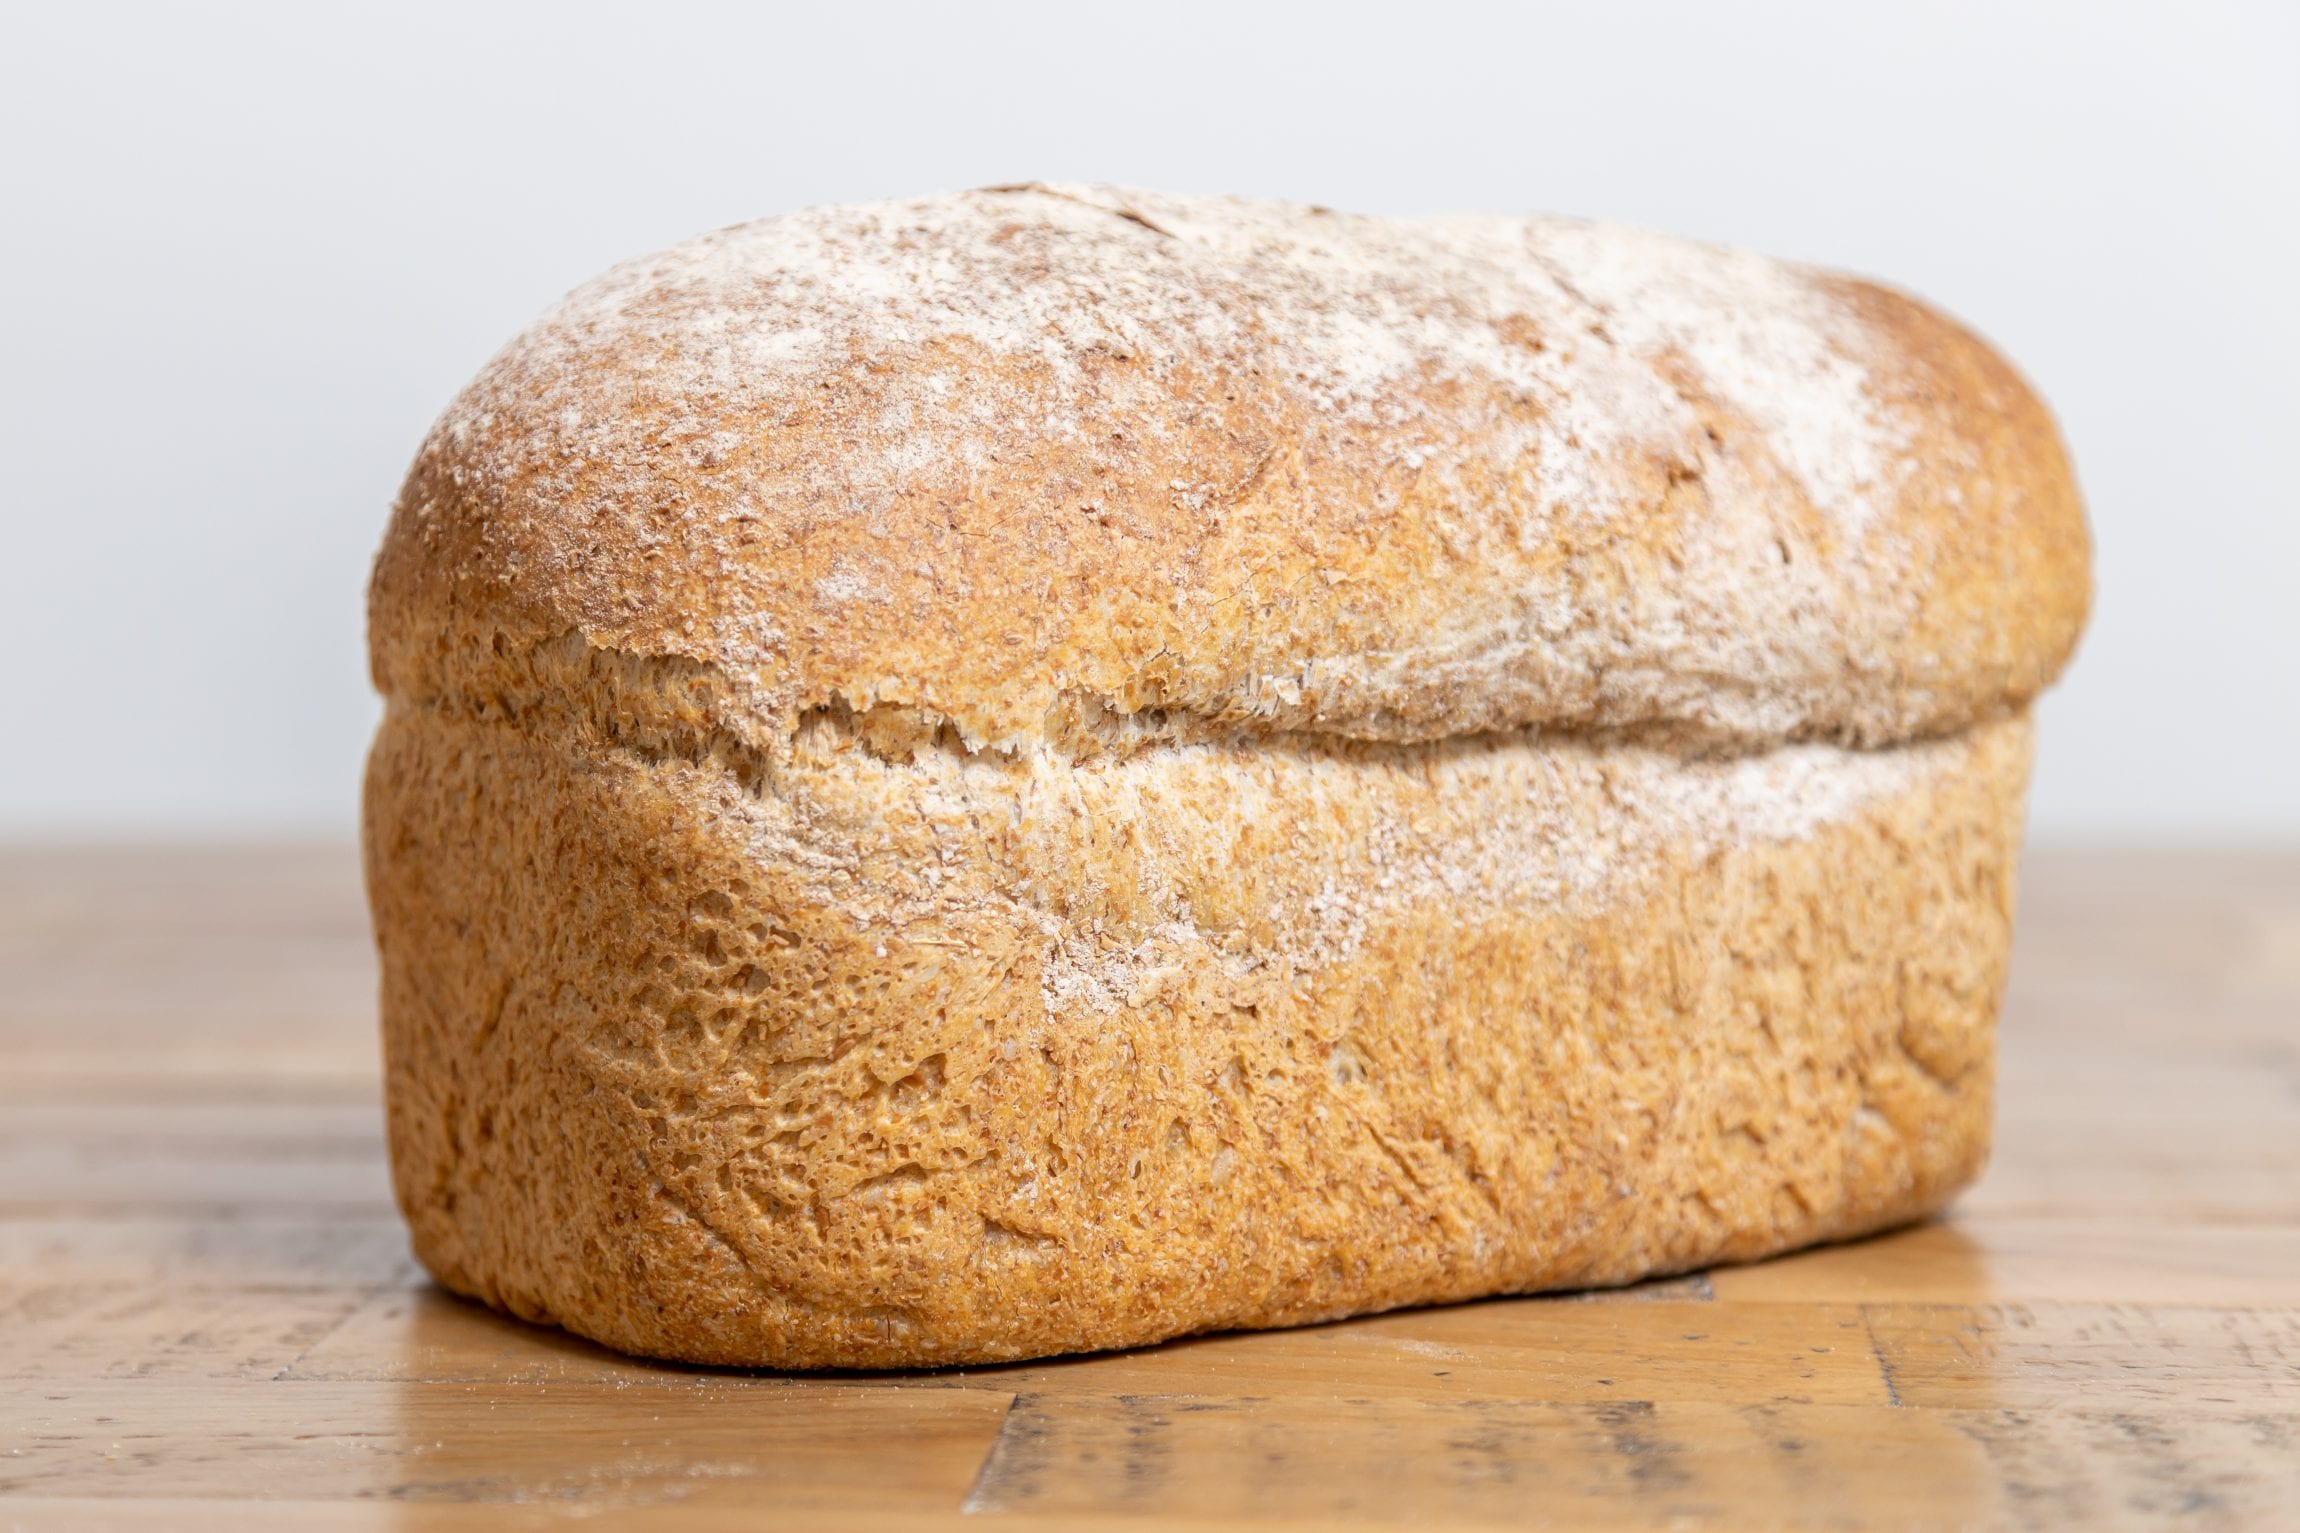 Large Rustic Wholemeal